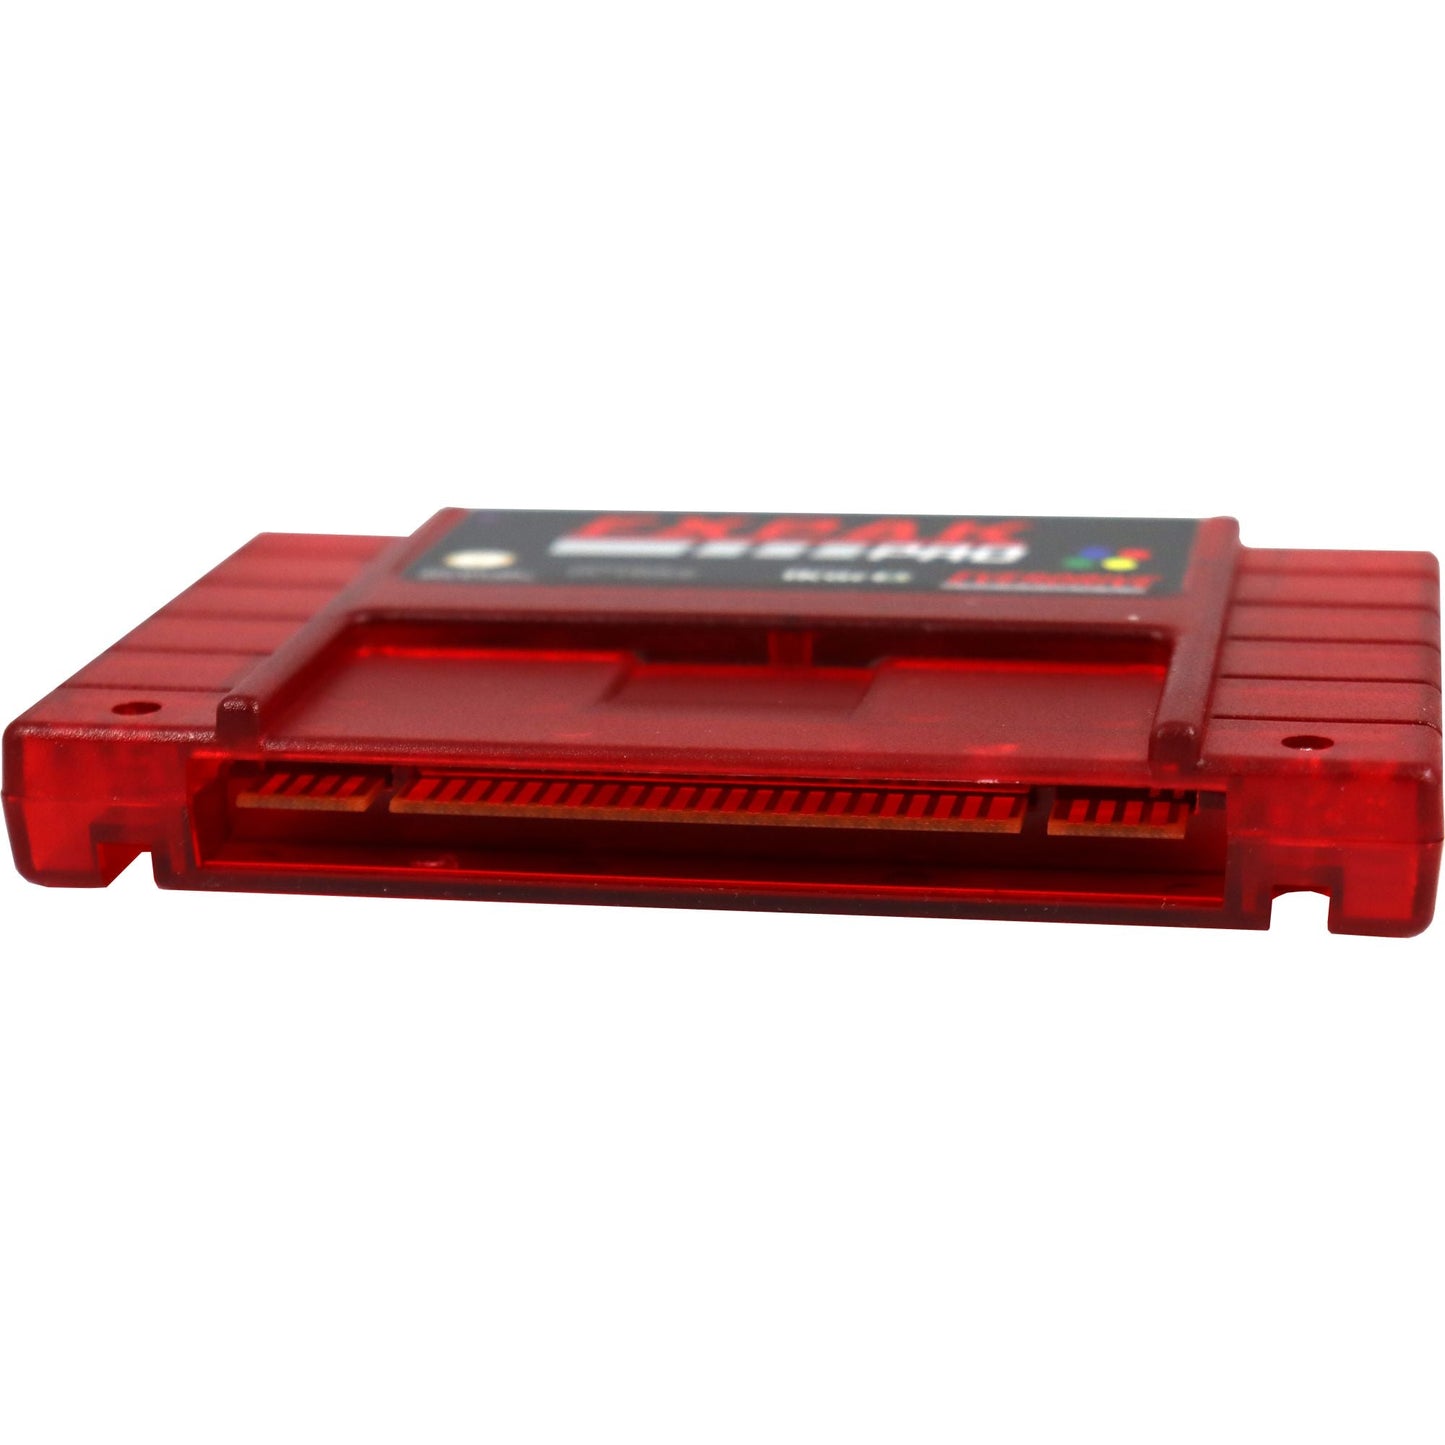 FXPAK PRO NAS - Frosted Red